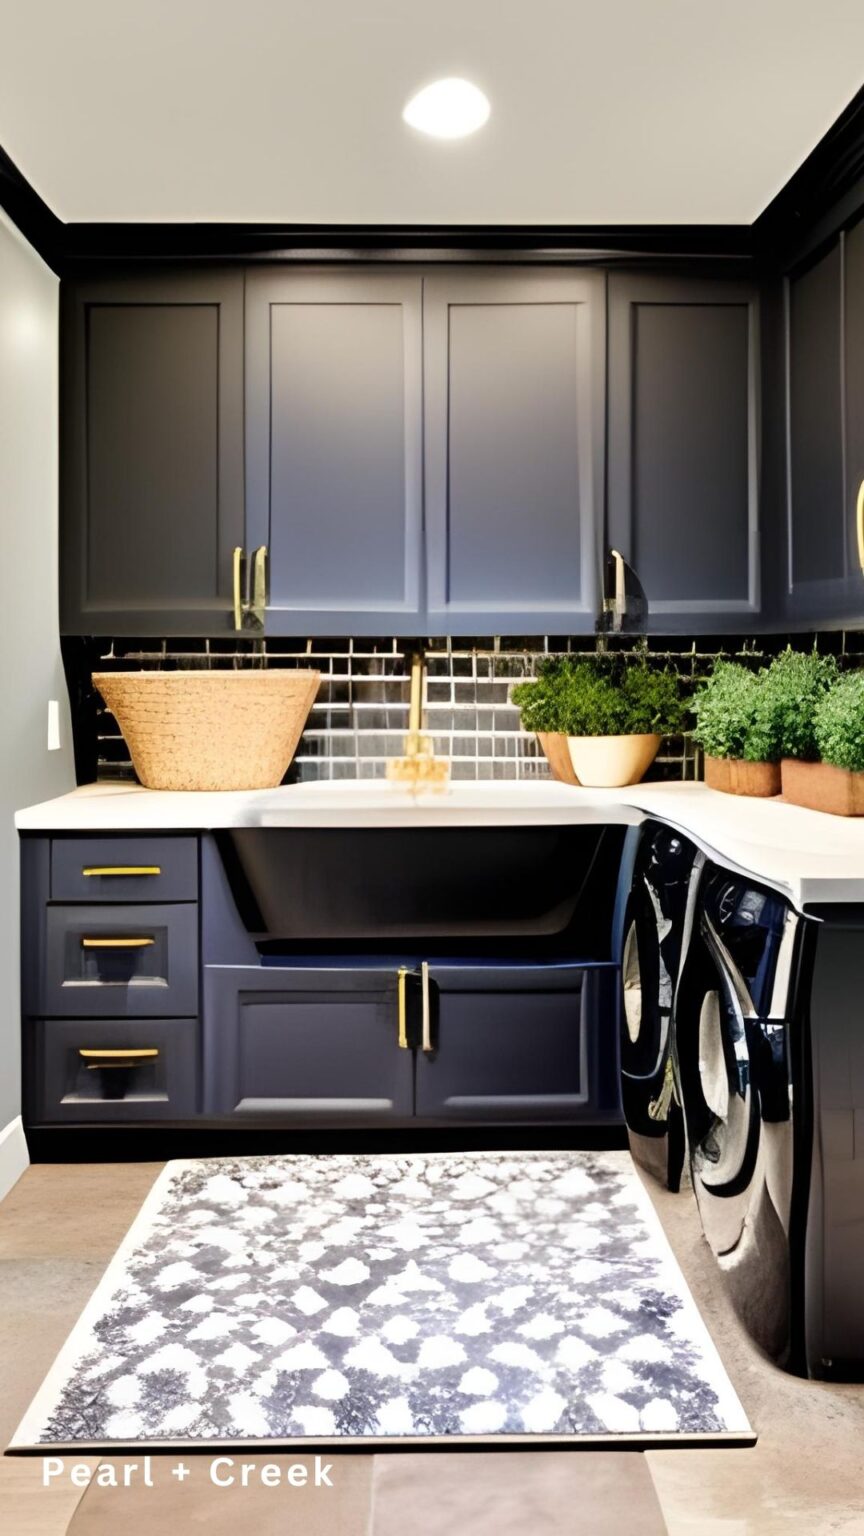 Time for Stylish Laundry Room Ideas in 2023 - Pearl + Creek